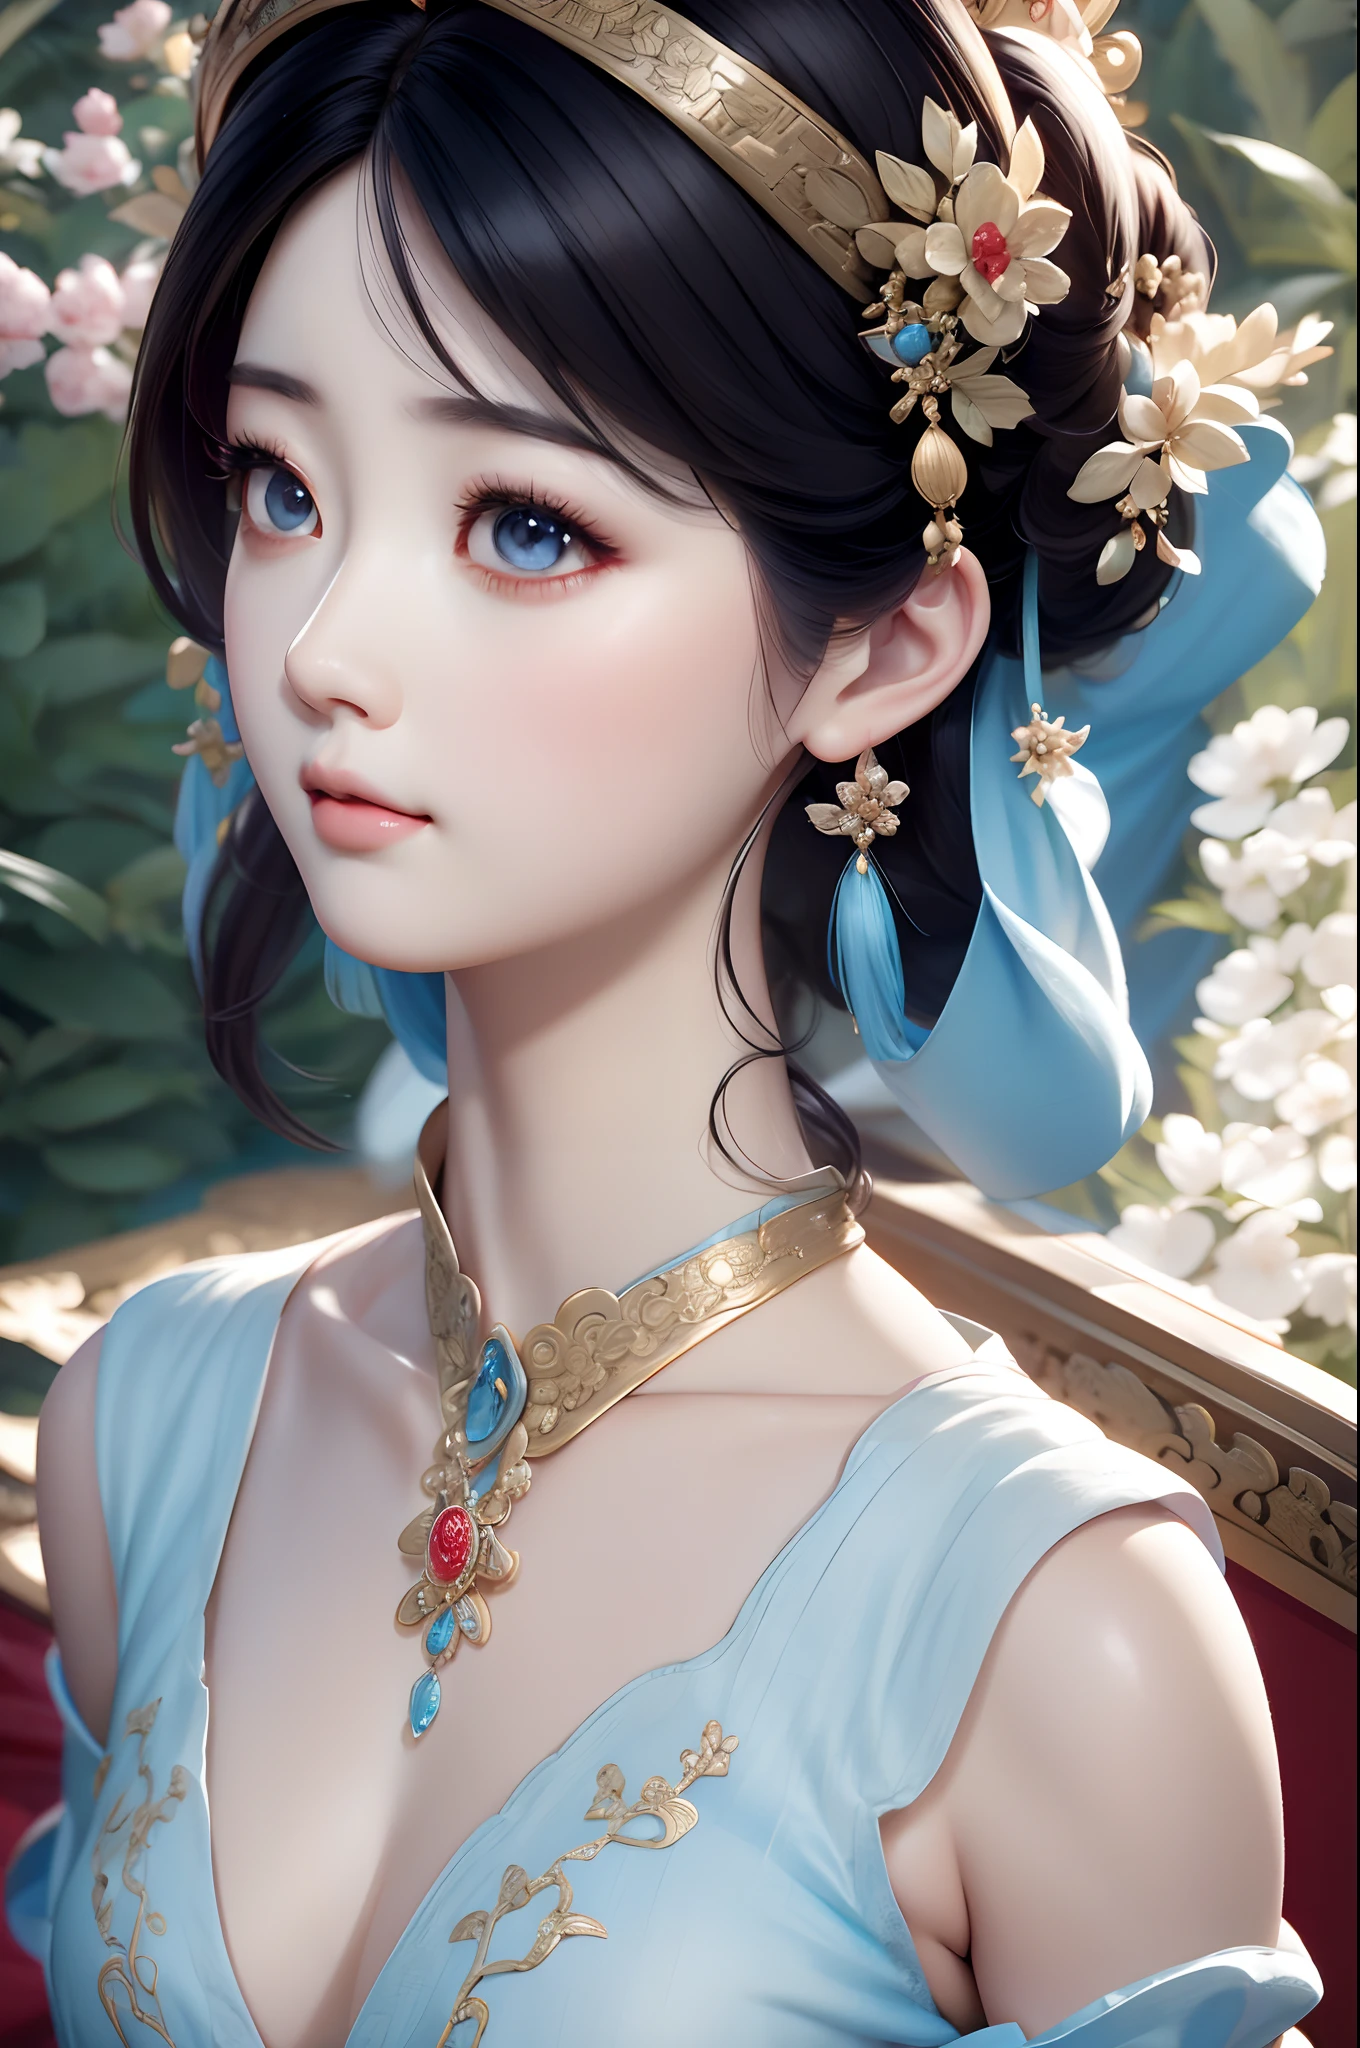 Close-up of a woman wearing a light blue slip dress necklace, Chinese style, Chinese girl, Beautiful character painting, Guviz-style artwork, Palace ， A girl in Hanfu, Beautiful rendering of the Tang Dynasty, Realistic anime 3 D style, trending on cgstation, 8K high quality detailed art, Princesa chinesa antiga, Chinese woman, Guviz